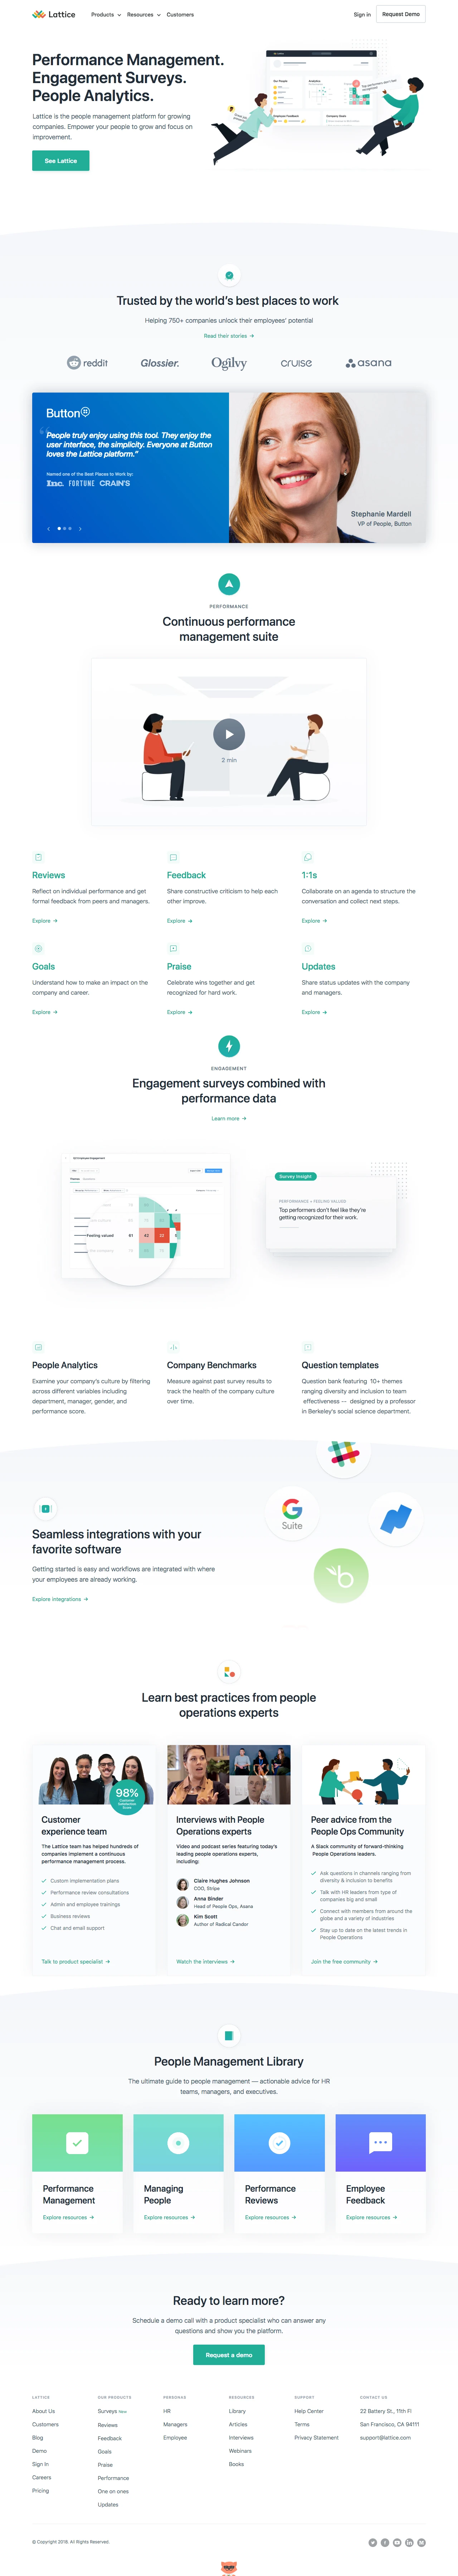 Lattice Landing Page Example: Lattice is a continuous performance management system combined with employee engagement insights. With Lattice, it’s easy to launch 360 reviews, share ongoing feedback, facilitate 1:1s, set up goal tracking, and run employee engagement surveys.